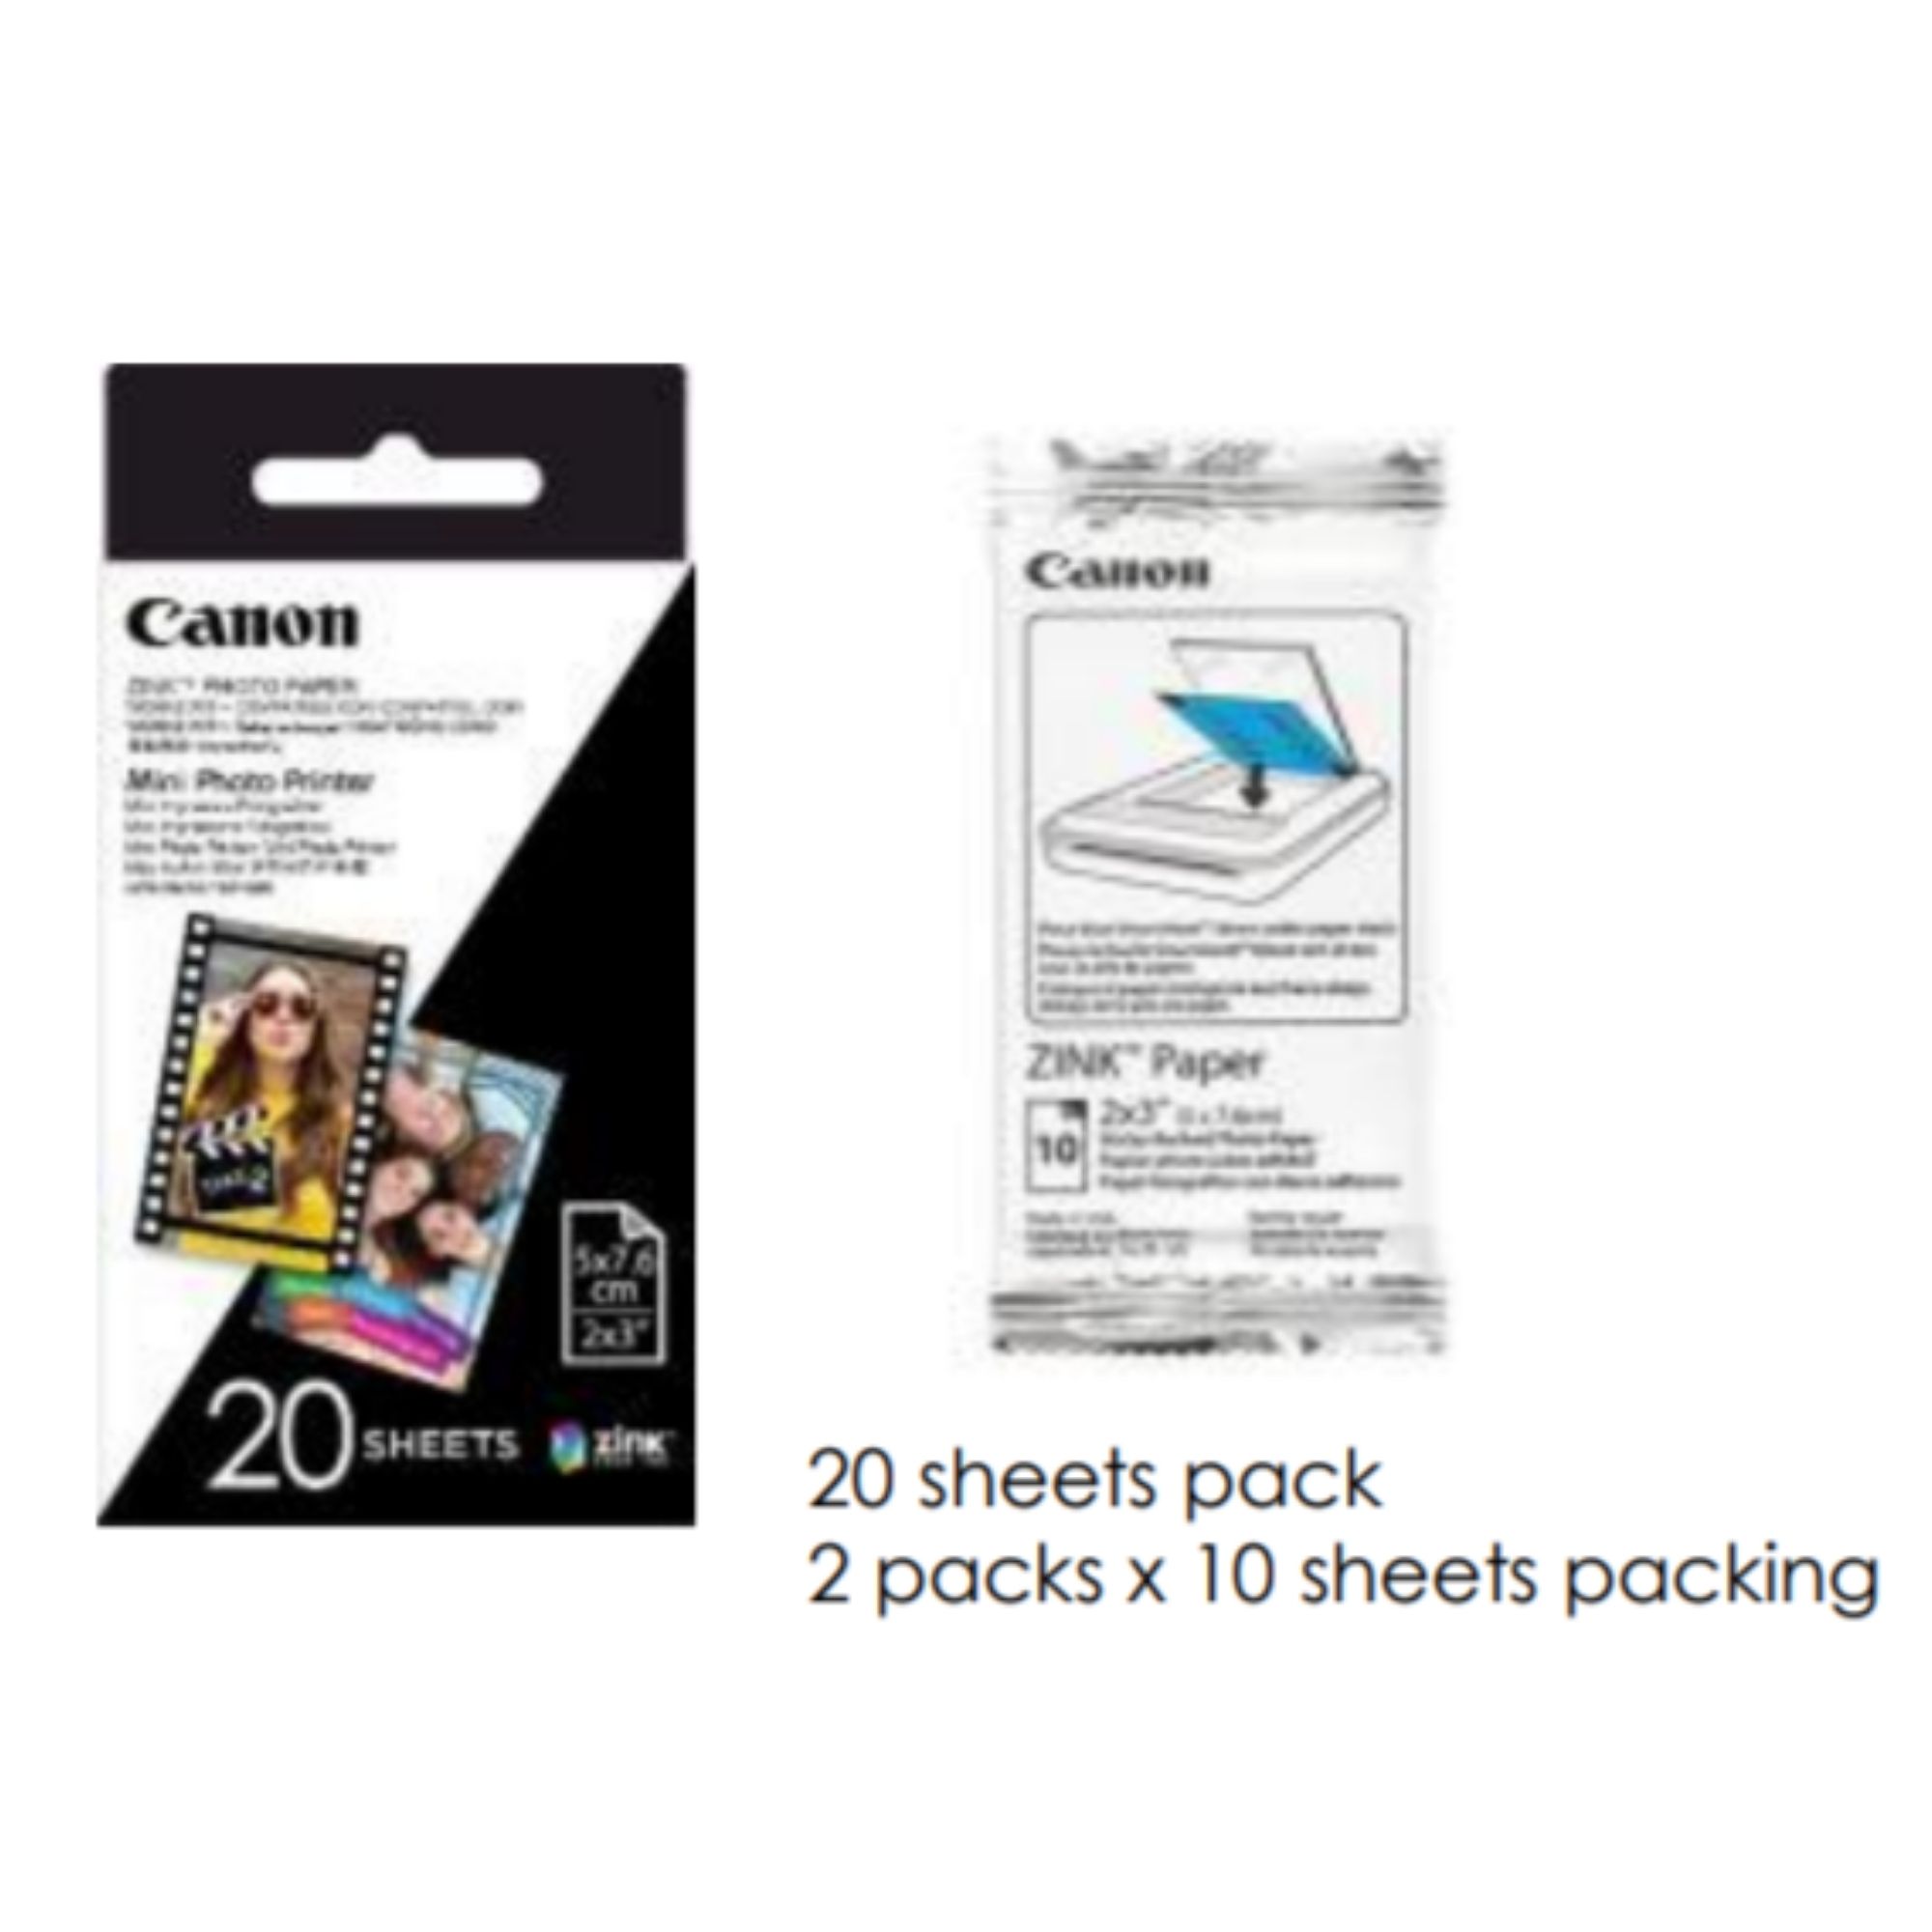 Canon ZP-2030-50 Zink Photo Paper Pack (50 Sheets) for MPP1 Mini Photo Printer